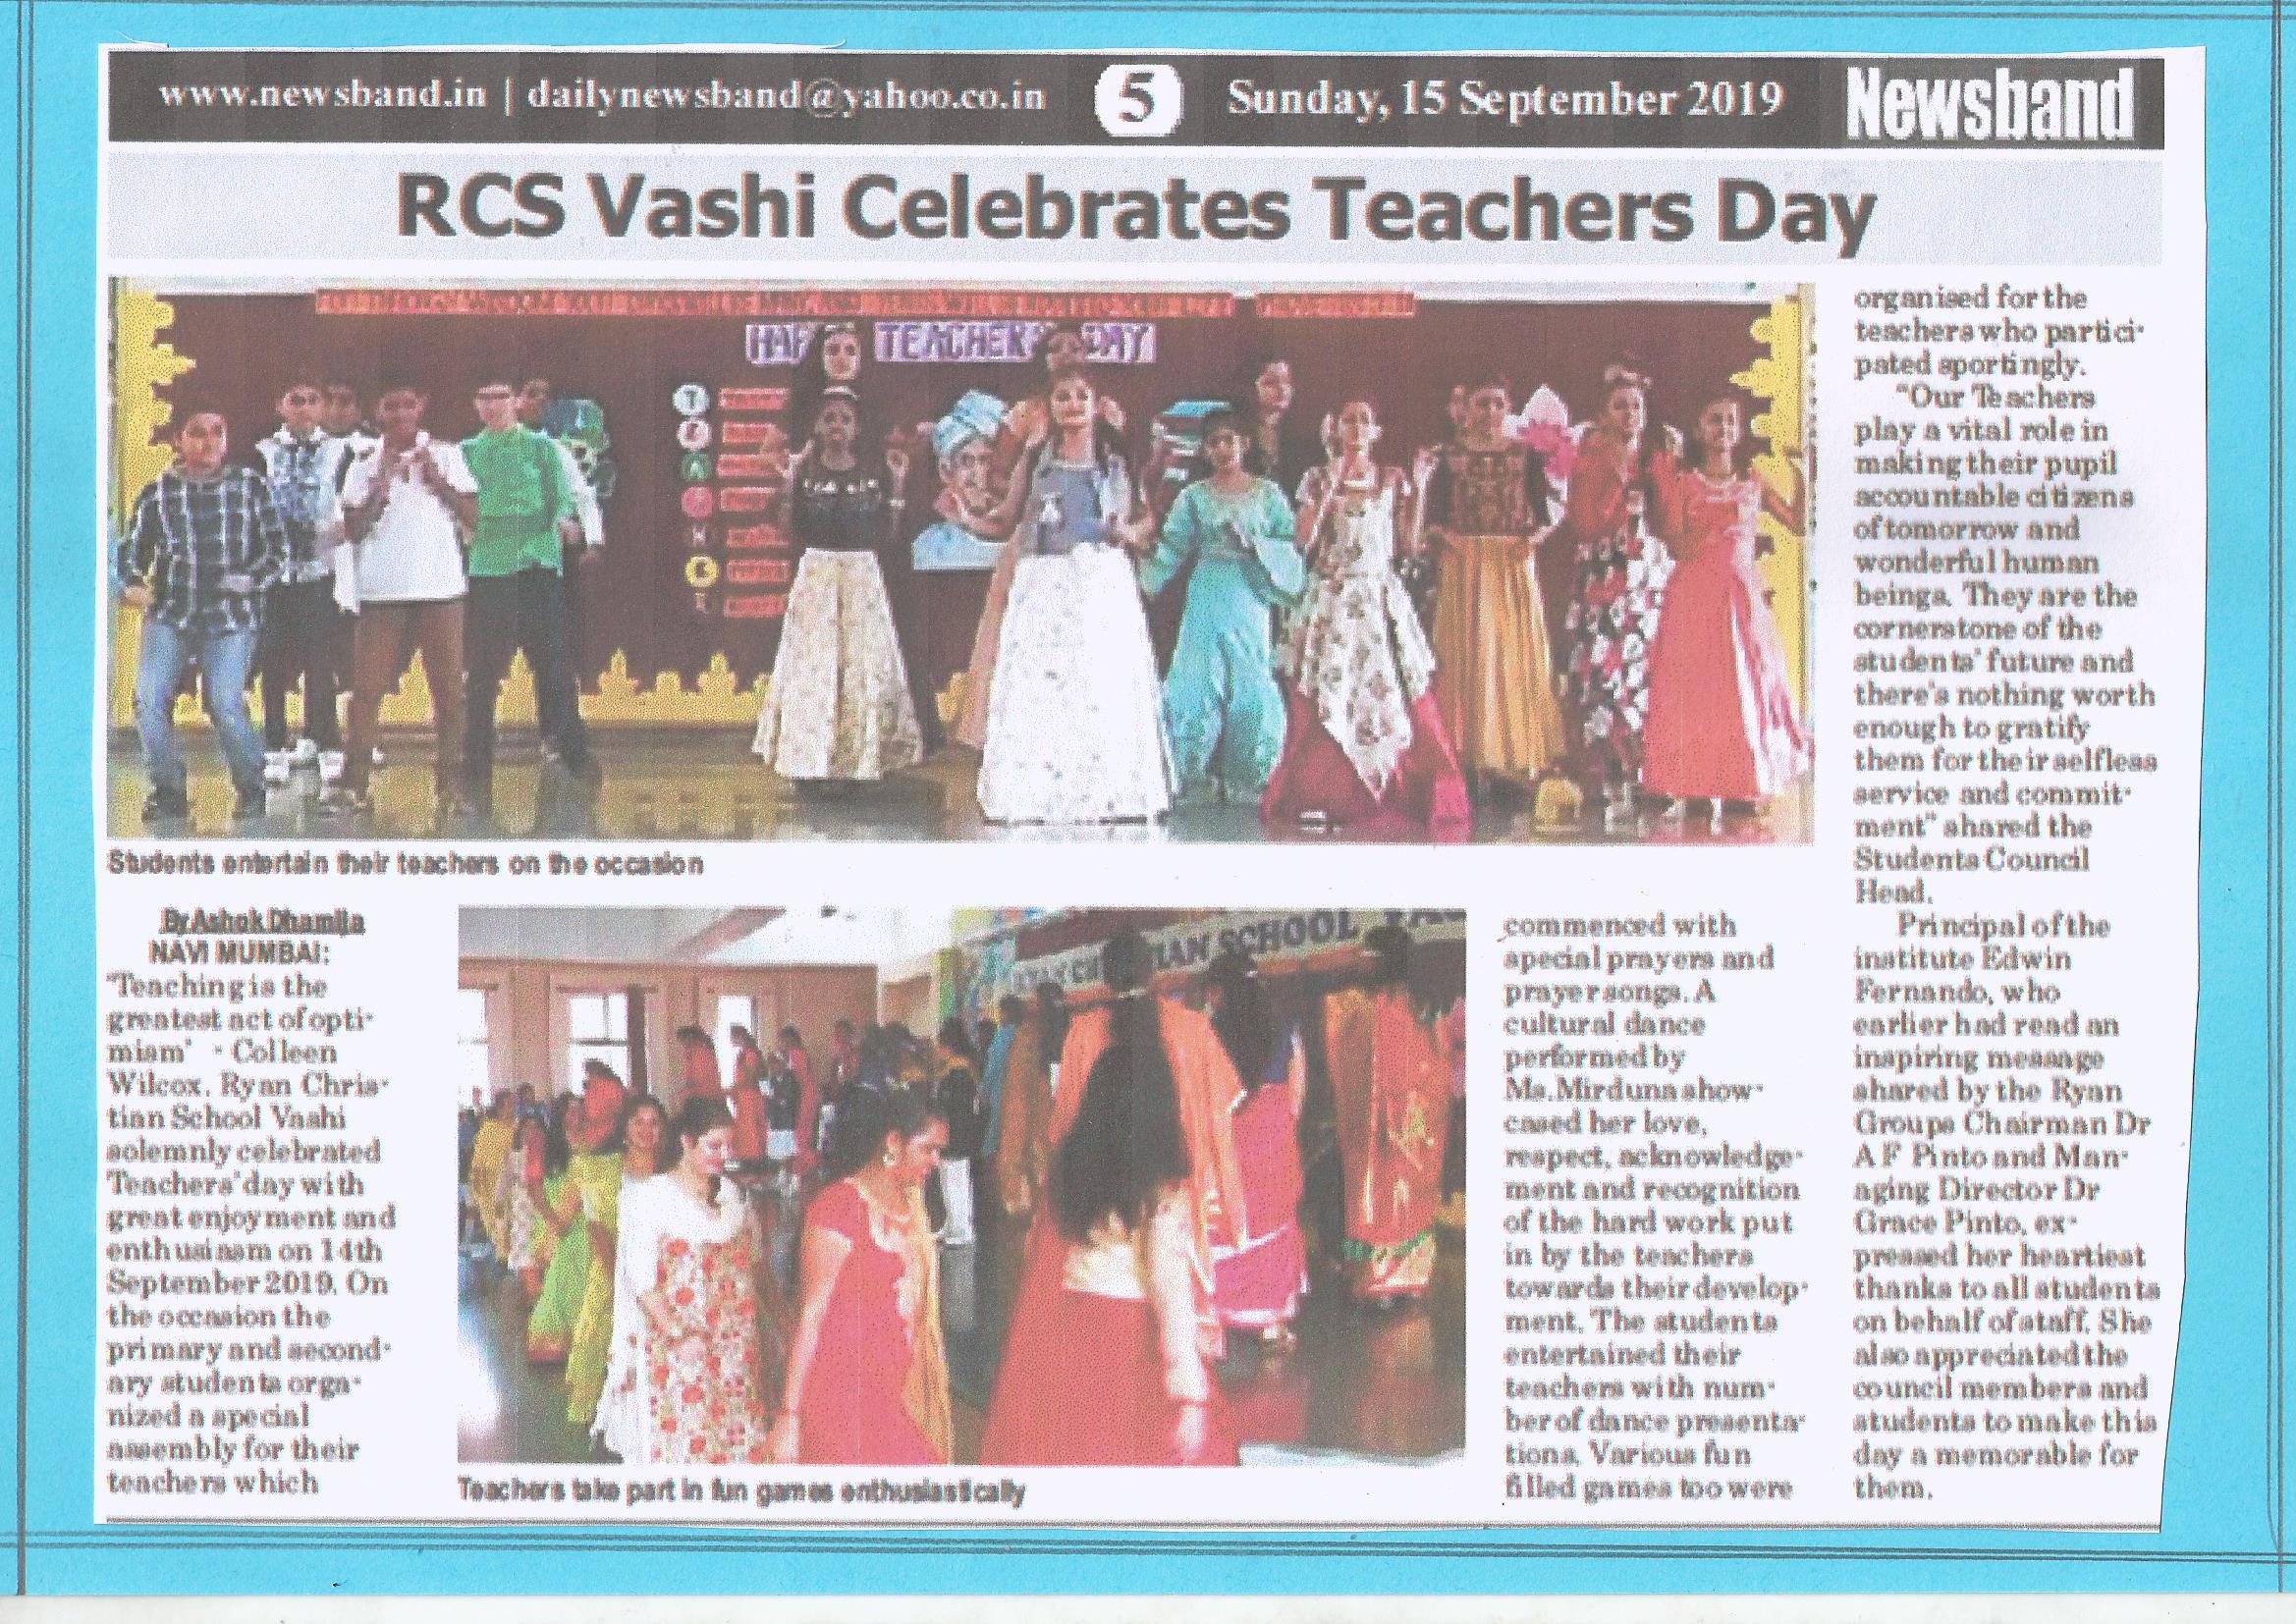 Teacher’s Day was featured in Newsband